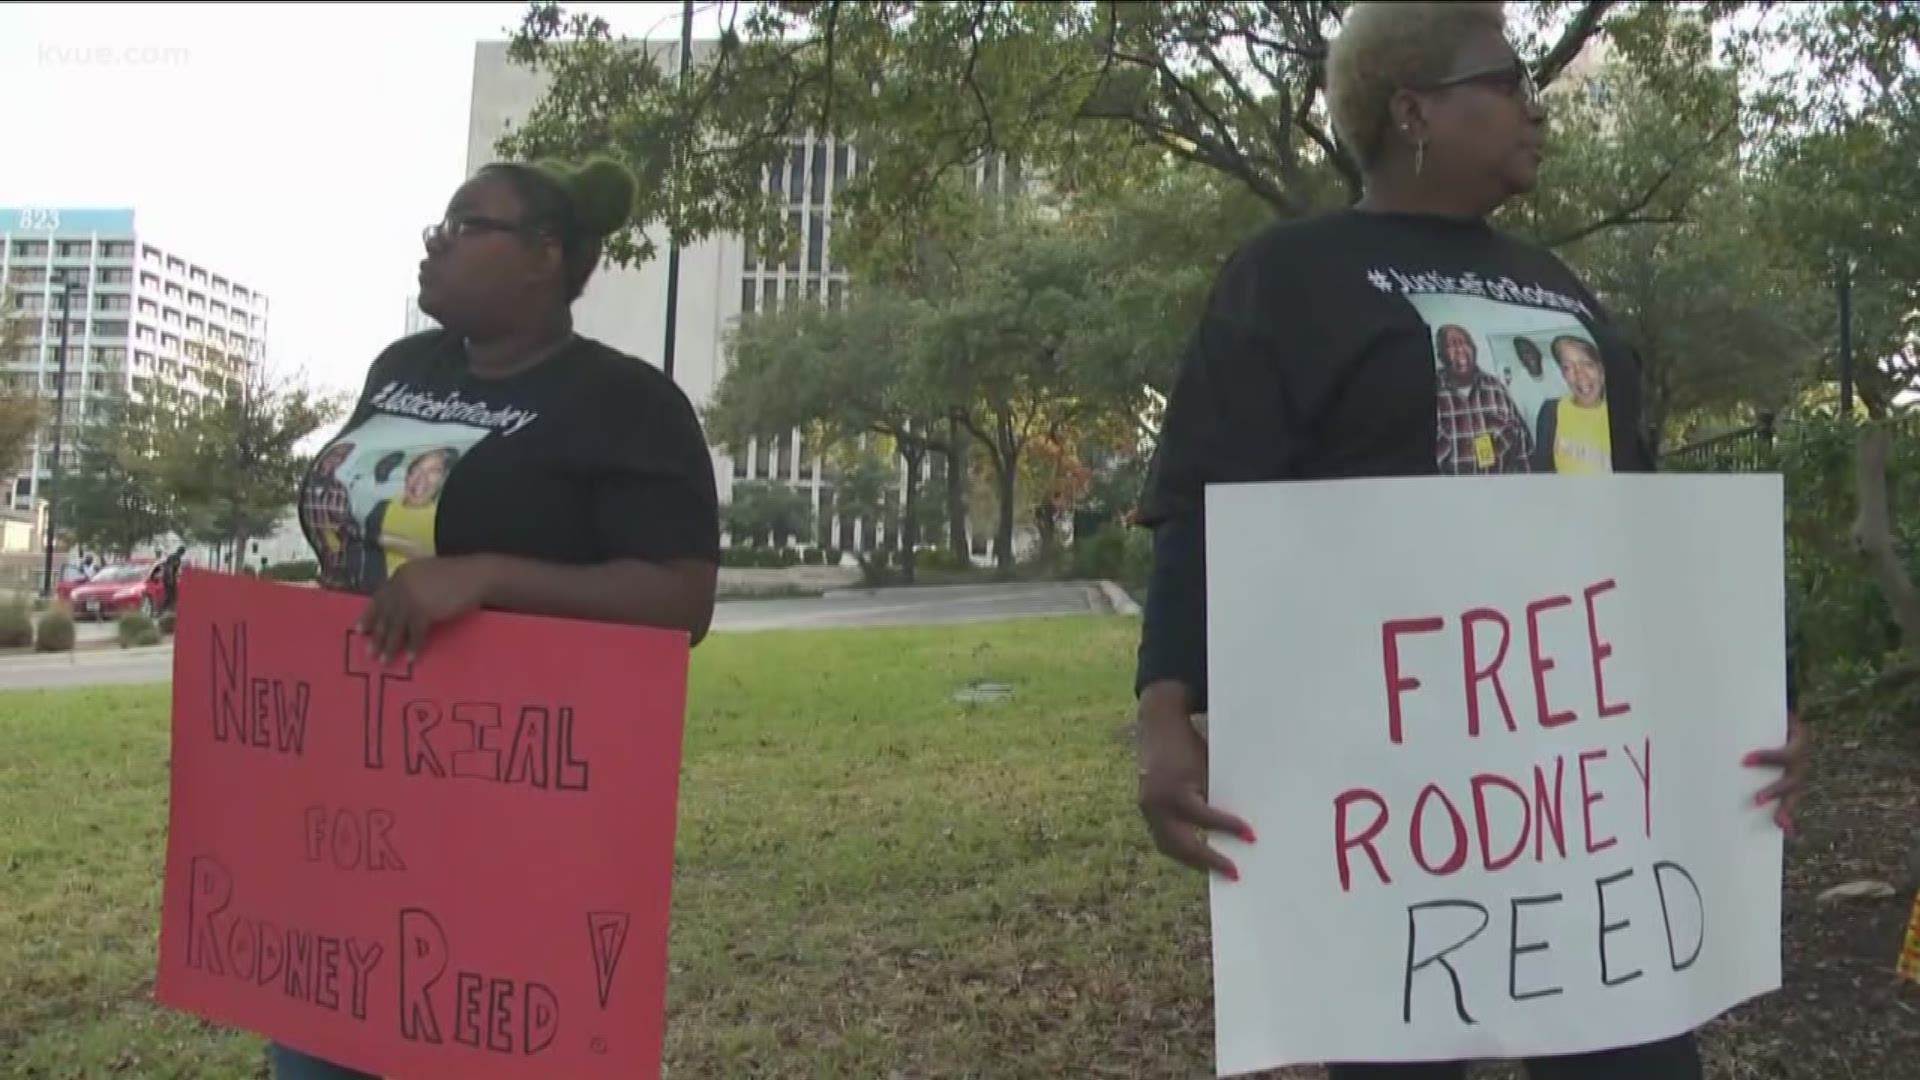 Two days after Rodney Reeds execution was stopped, supporters rallied at the Governor's Mansion to call for his freedom.